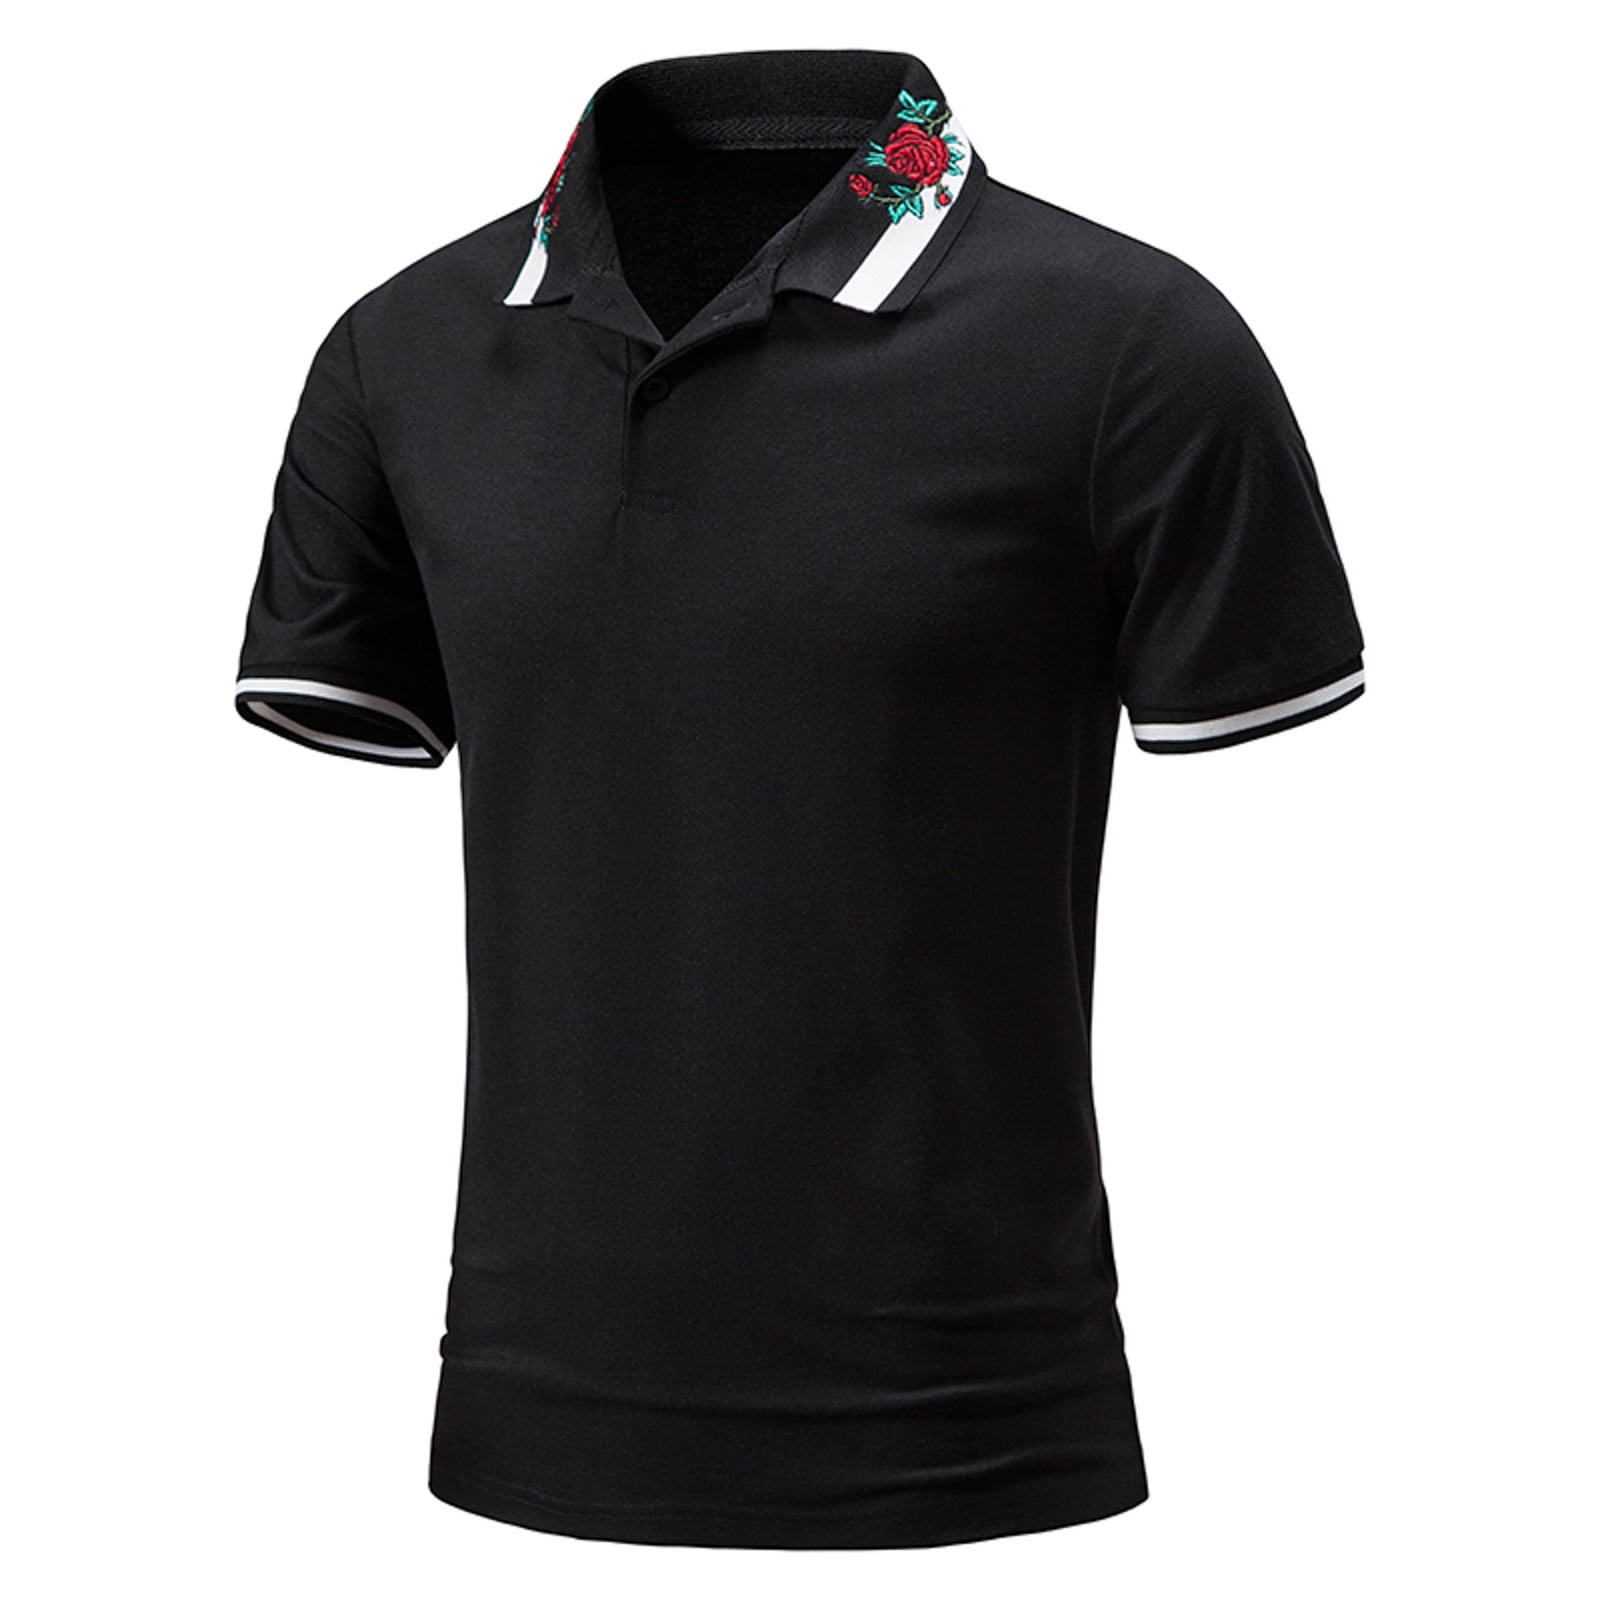  Hook And Loop - Men's Polos / Men's T-shirts, Polos & Shirts:  Clothing & Accessories